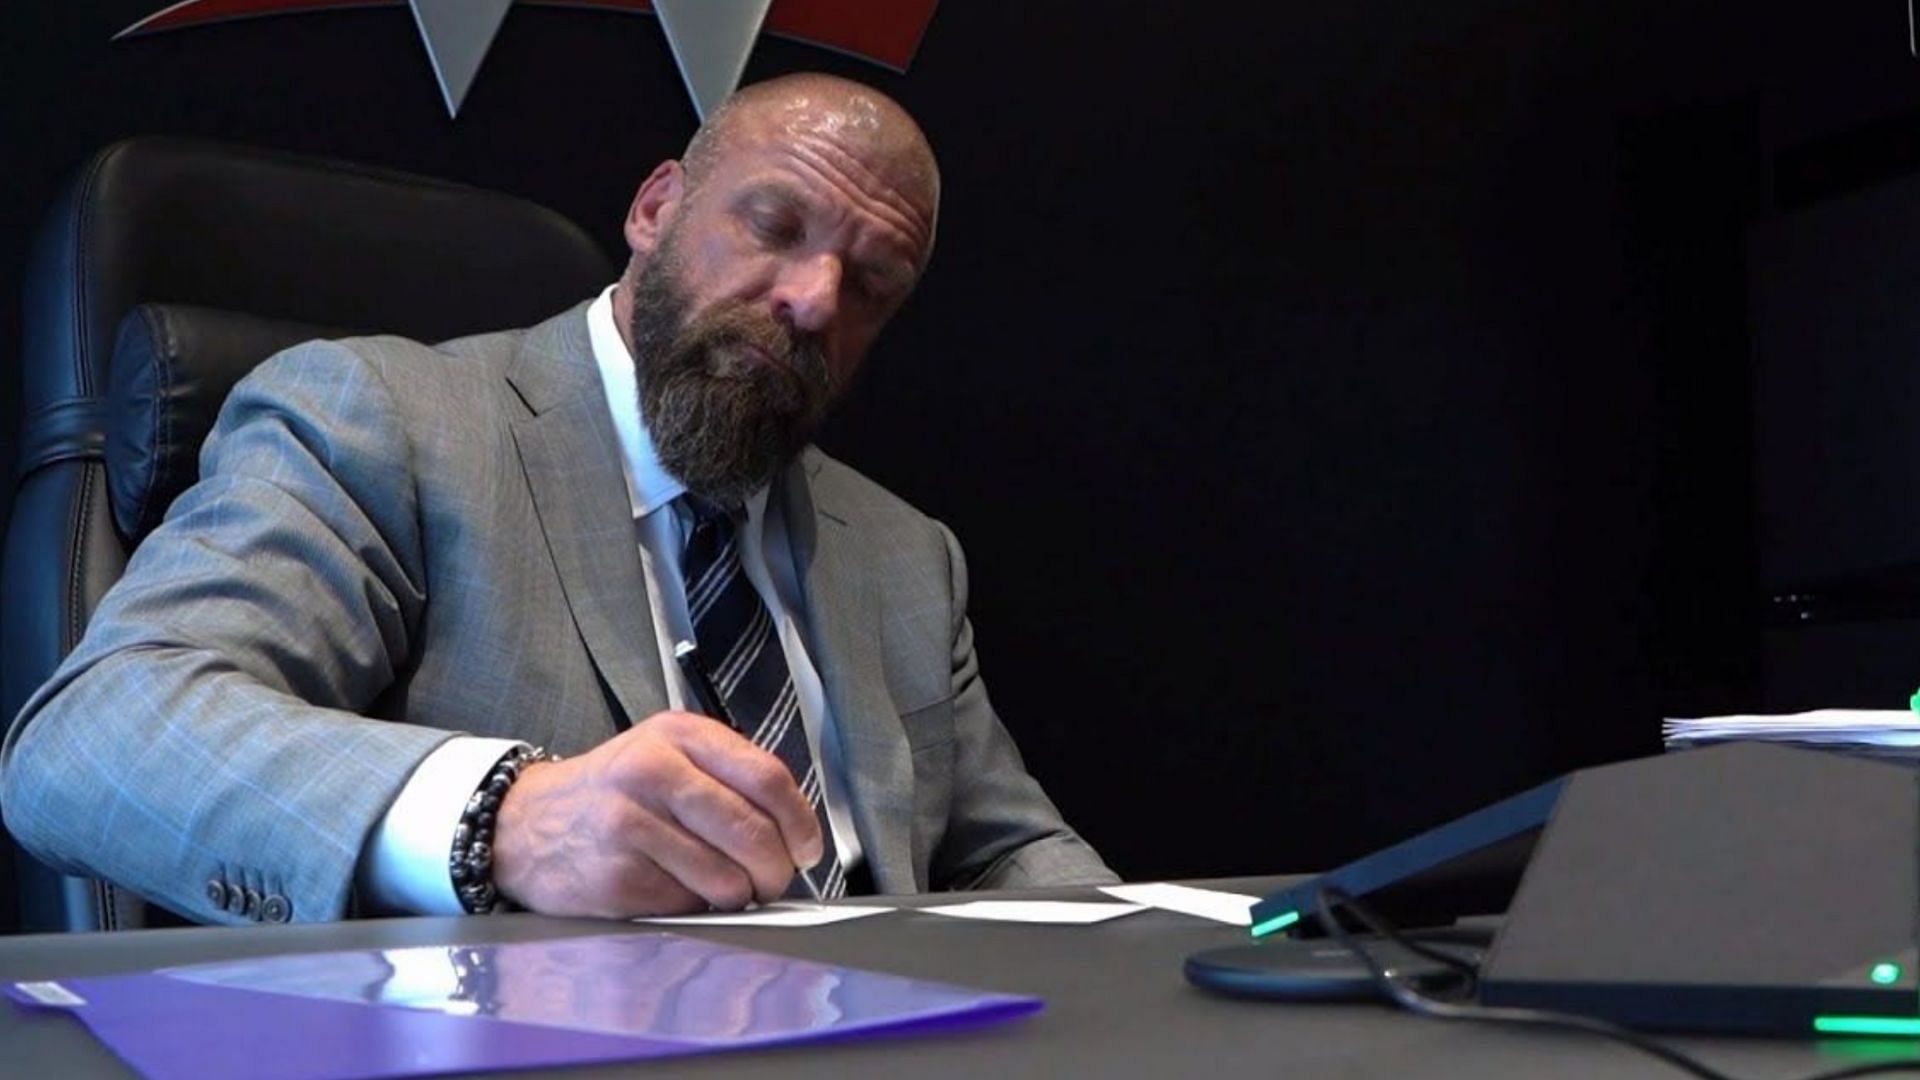 WWE Chief Content Officer Triple H re-signed Bray Wyatt last year